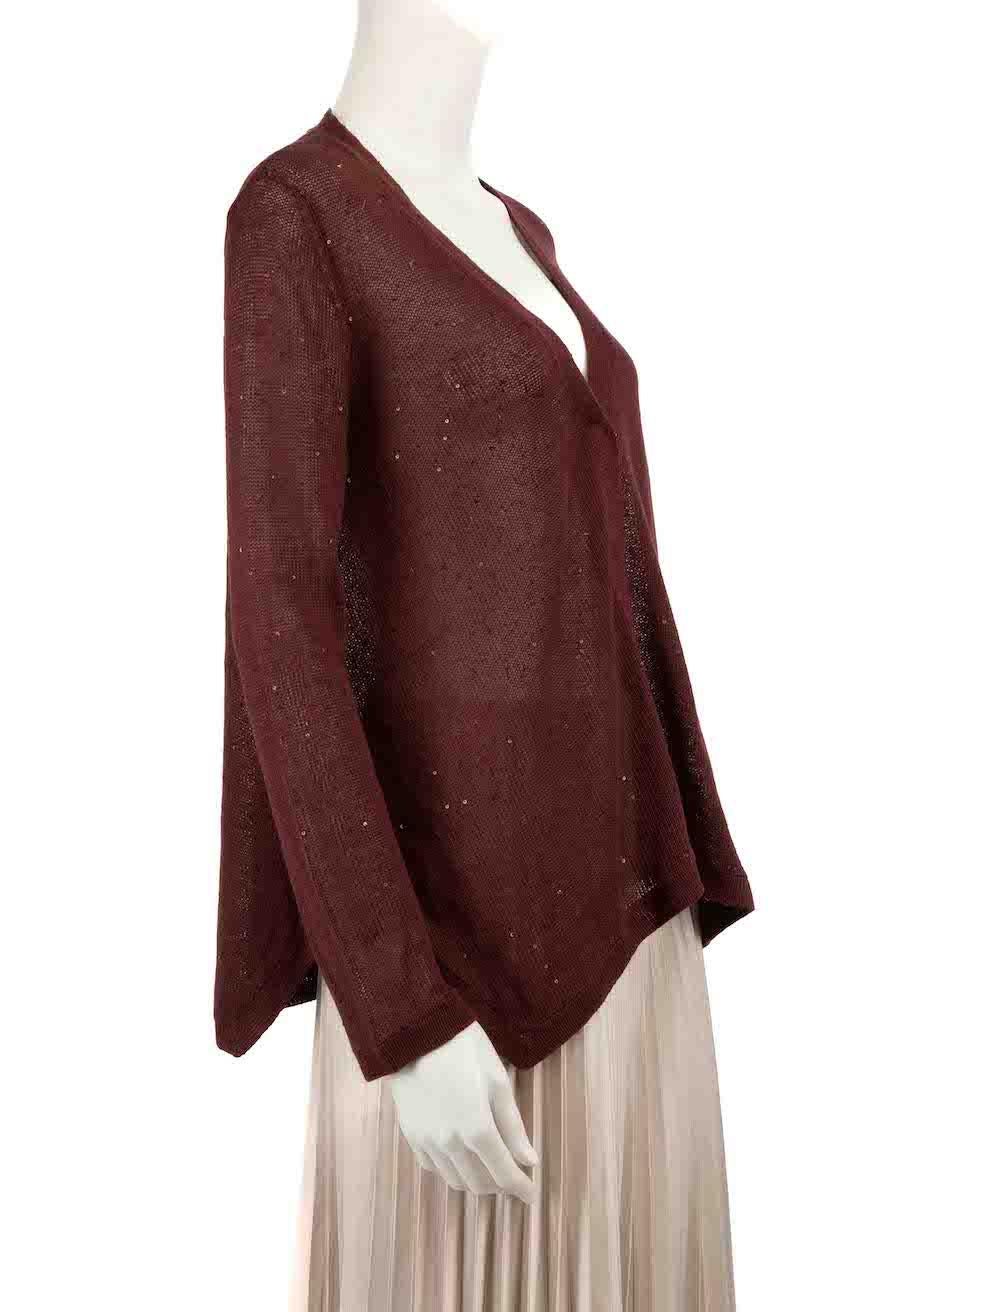 CONDITION is Very good. Hardly any visible wear to cardigan is evident on this used Brunello Cucinelli designer resale item.
 
 
 
 Details
 
 
 Burgundy
 
 Linen
 
 Knit cardigan
 
 Sequin embellished
 
 Long sleeves
 
 V-neck
 
 Snap button